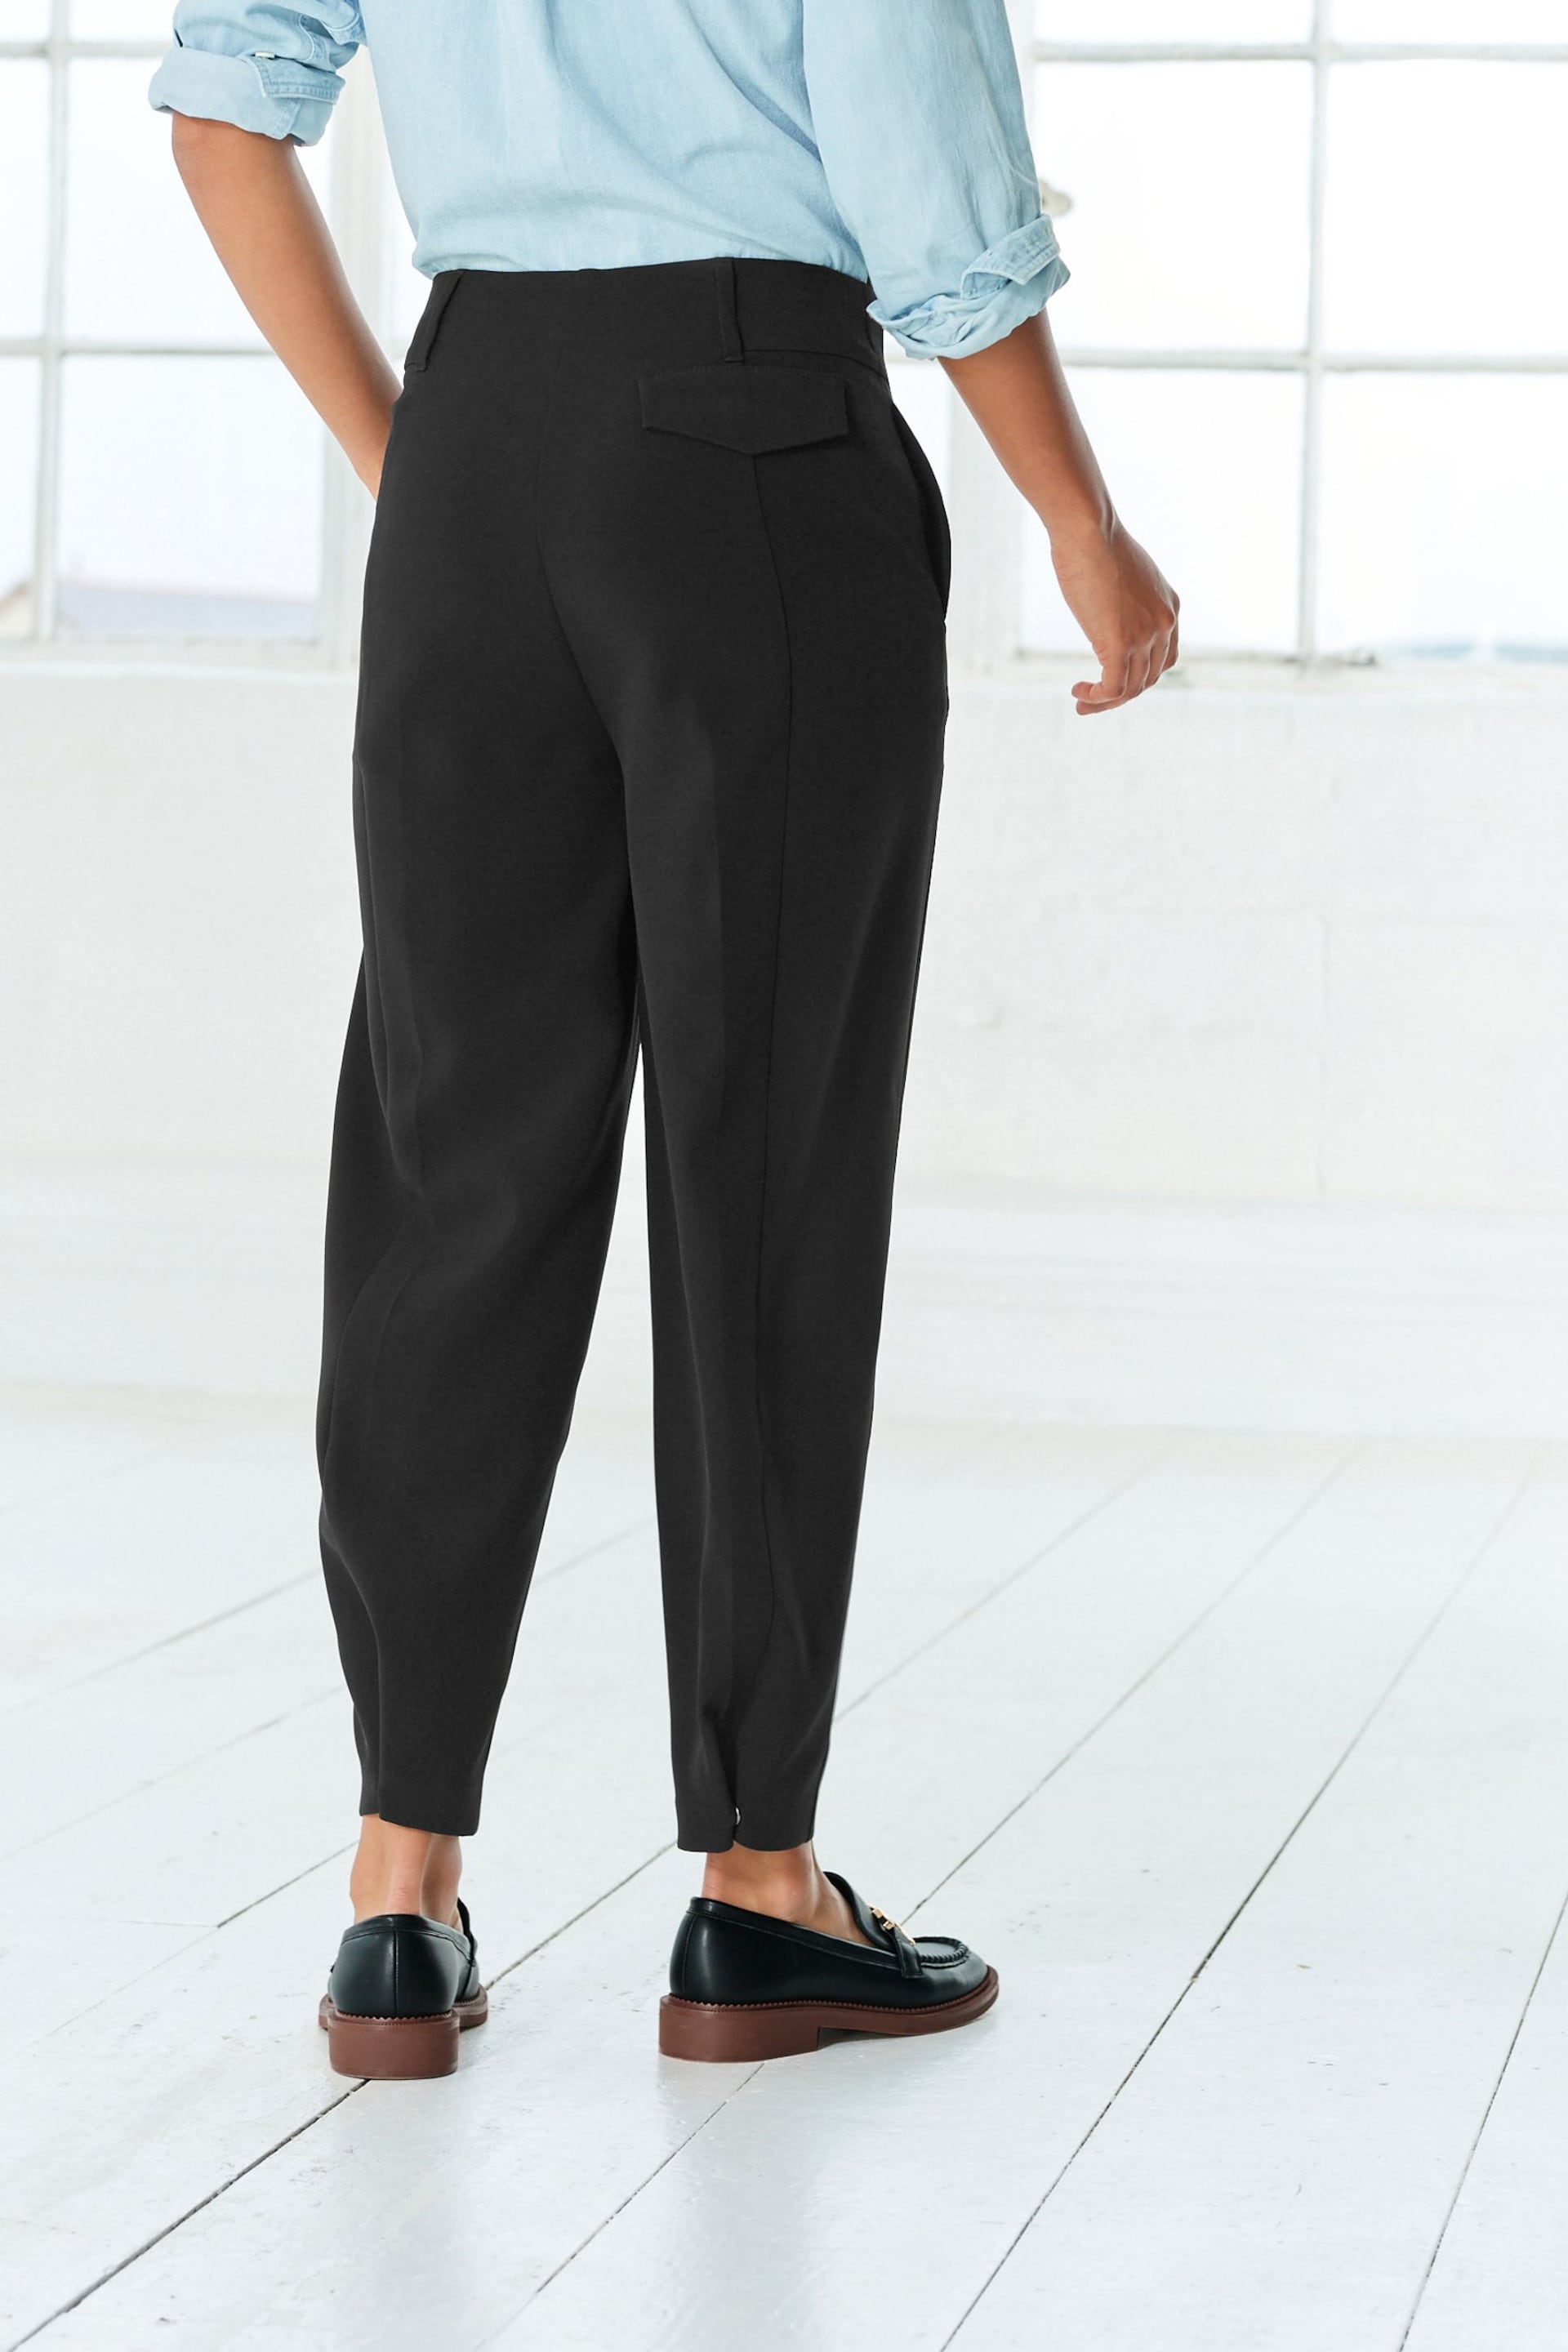 Black Adjustable Tailored Tapered Trousers - Image 3 of 6